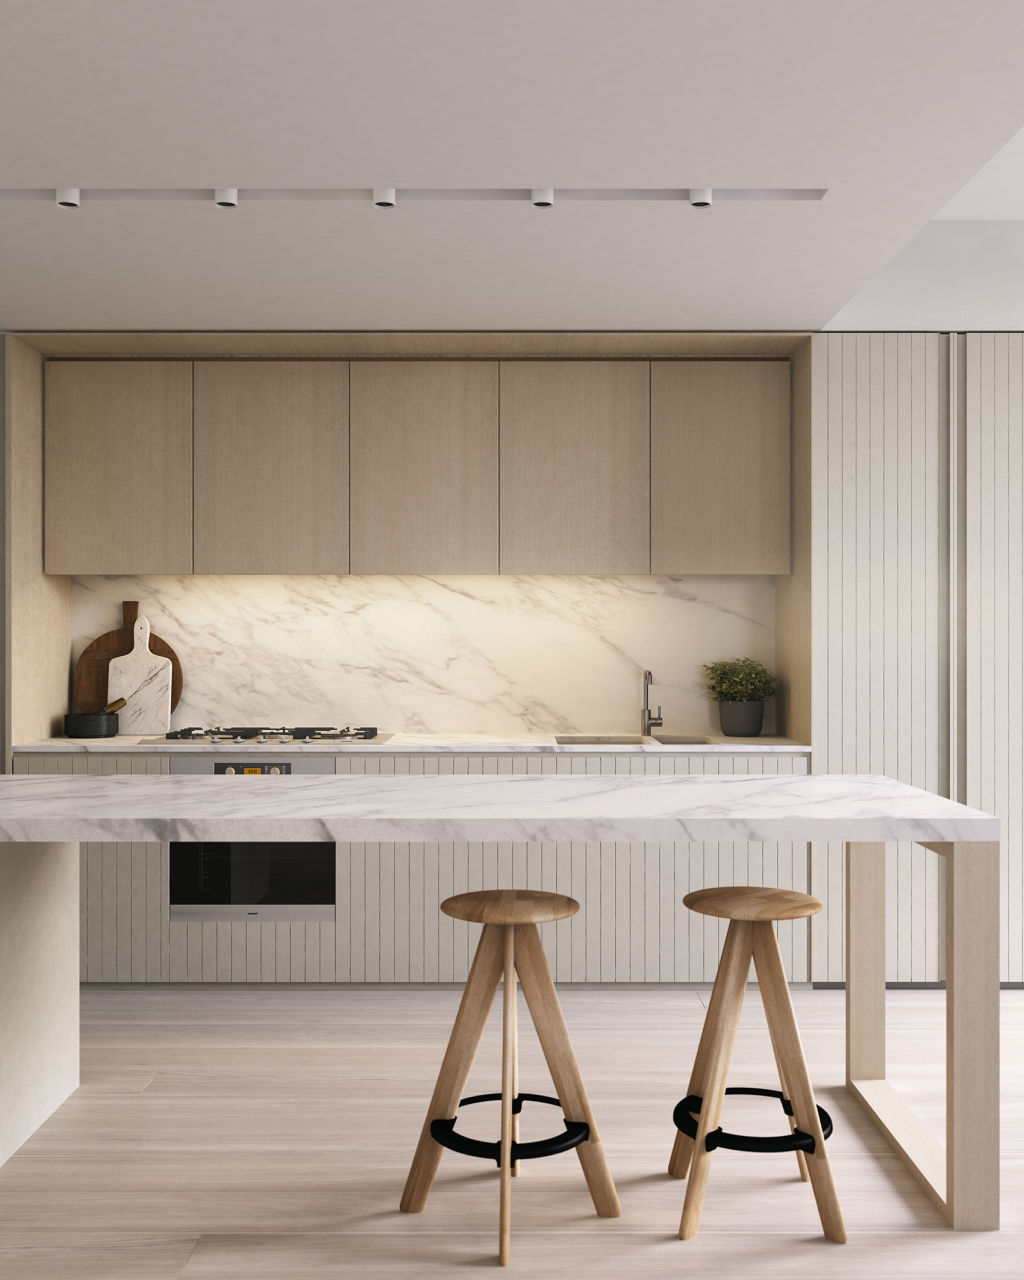 Bates Smart have adopted a neutral palette for the interiors. Photo: Supplied